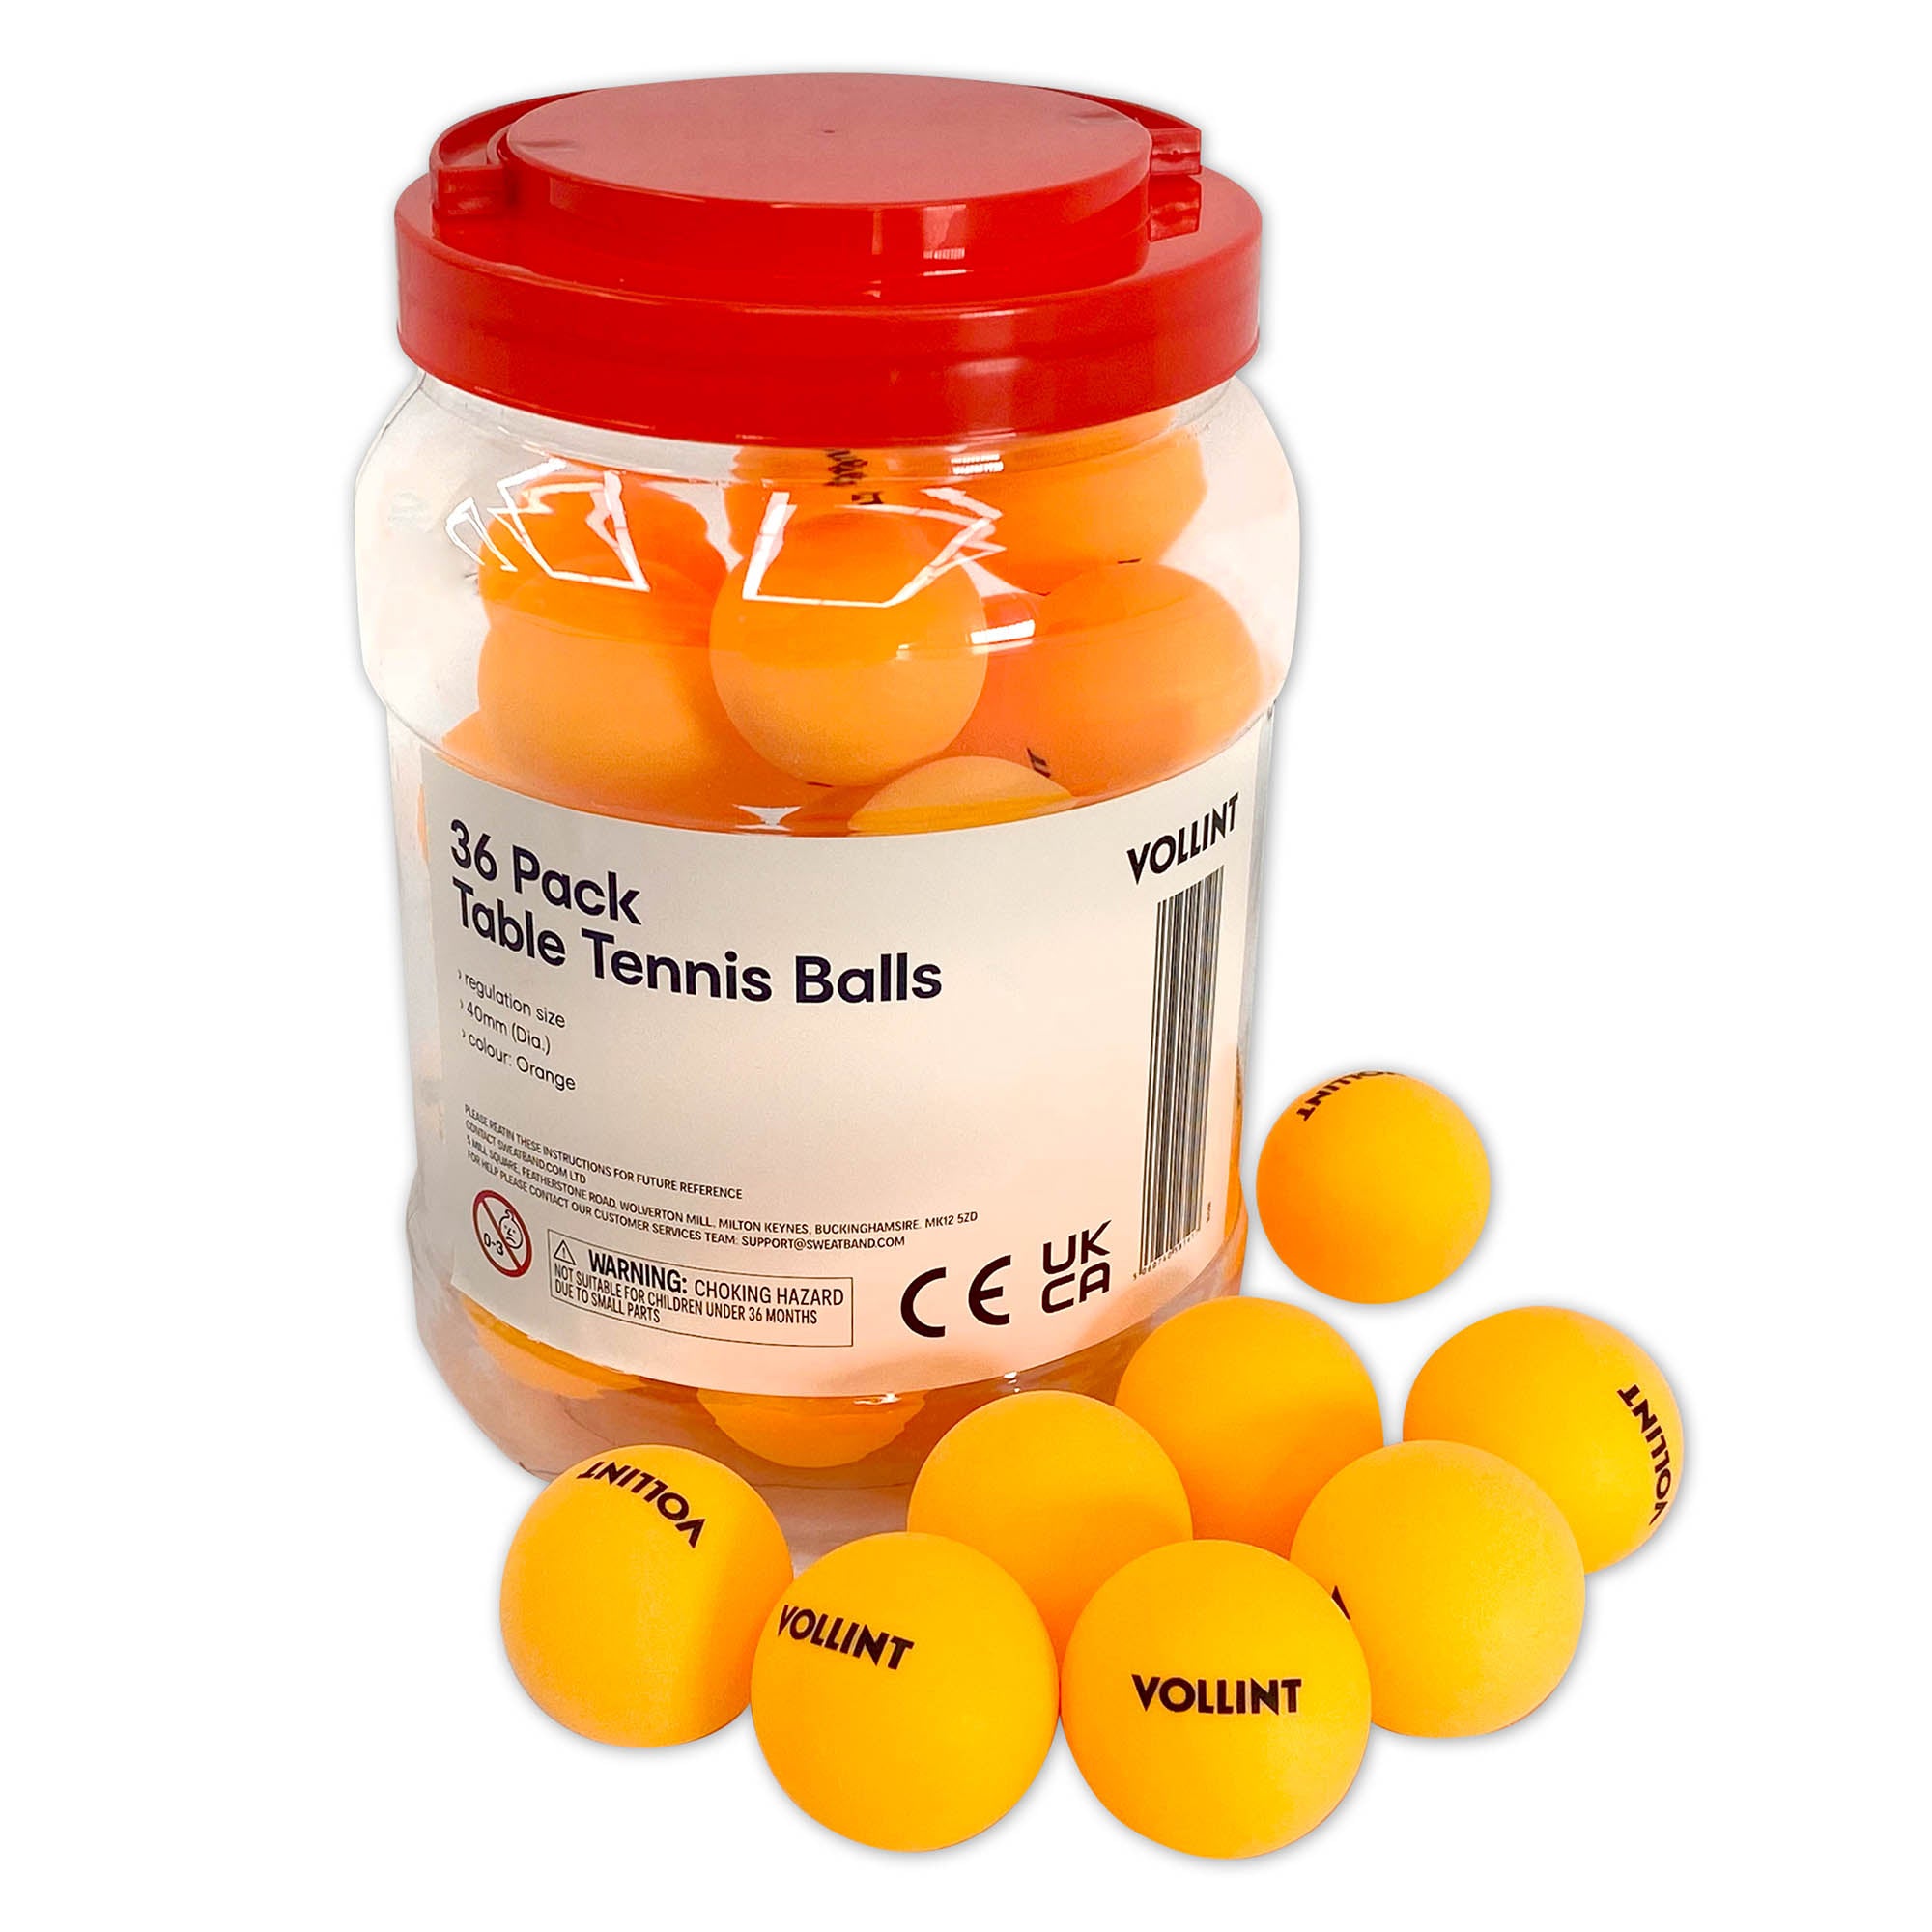 Vollint 1 Star Table Tennis Balls - Pack of 36